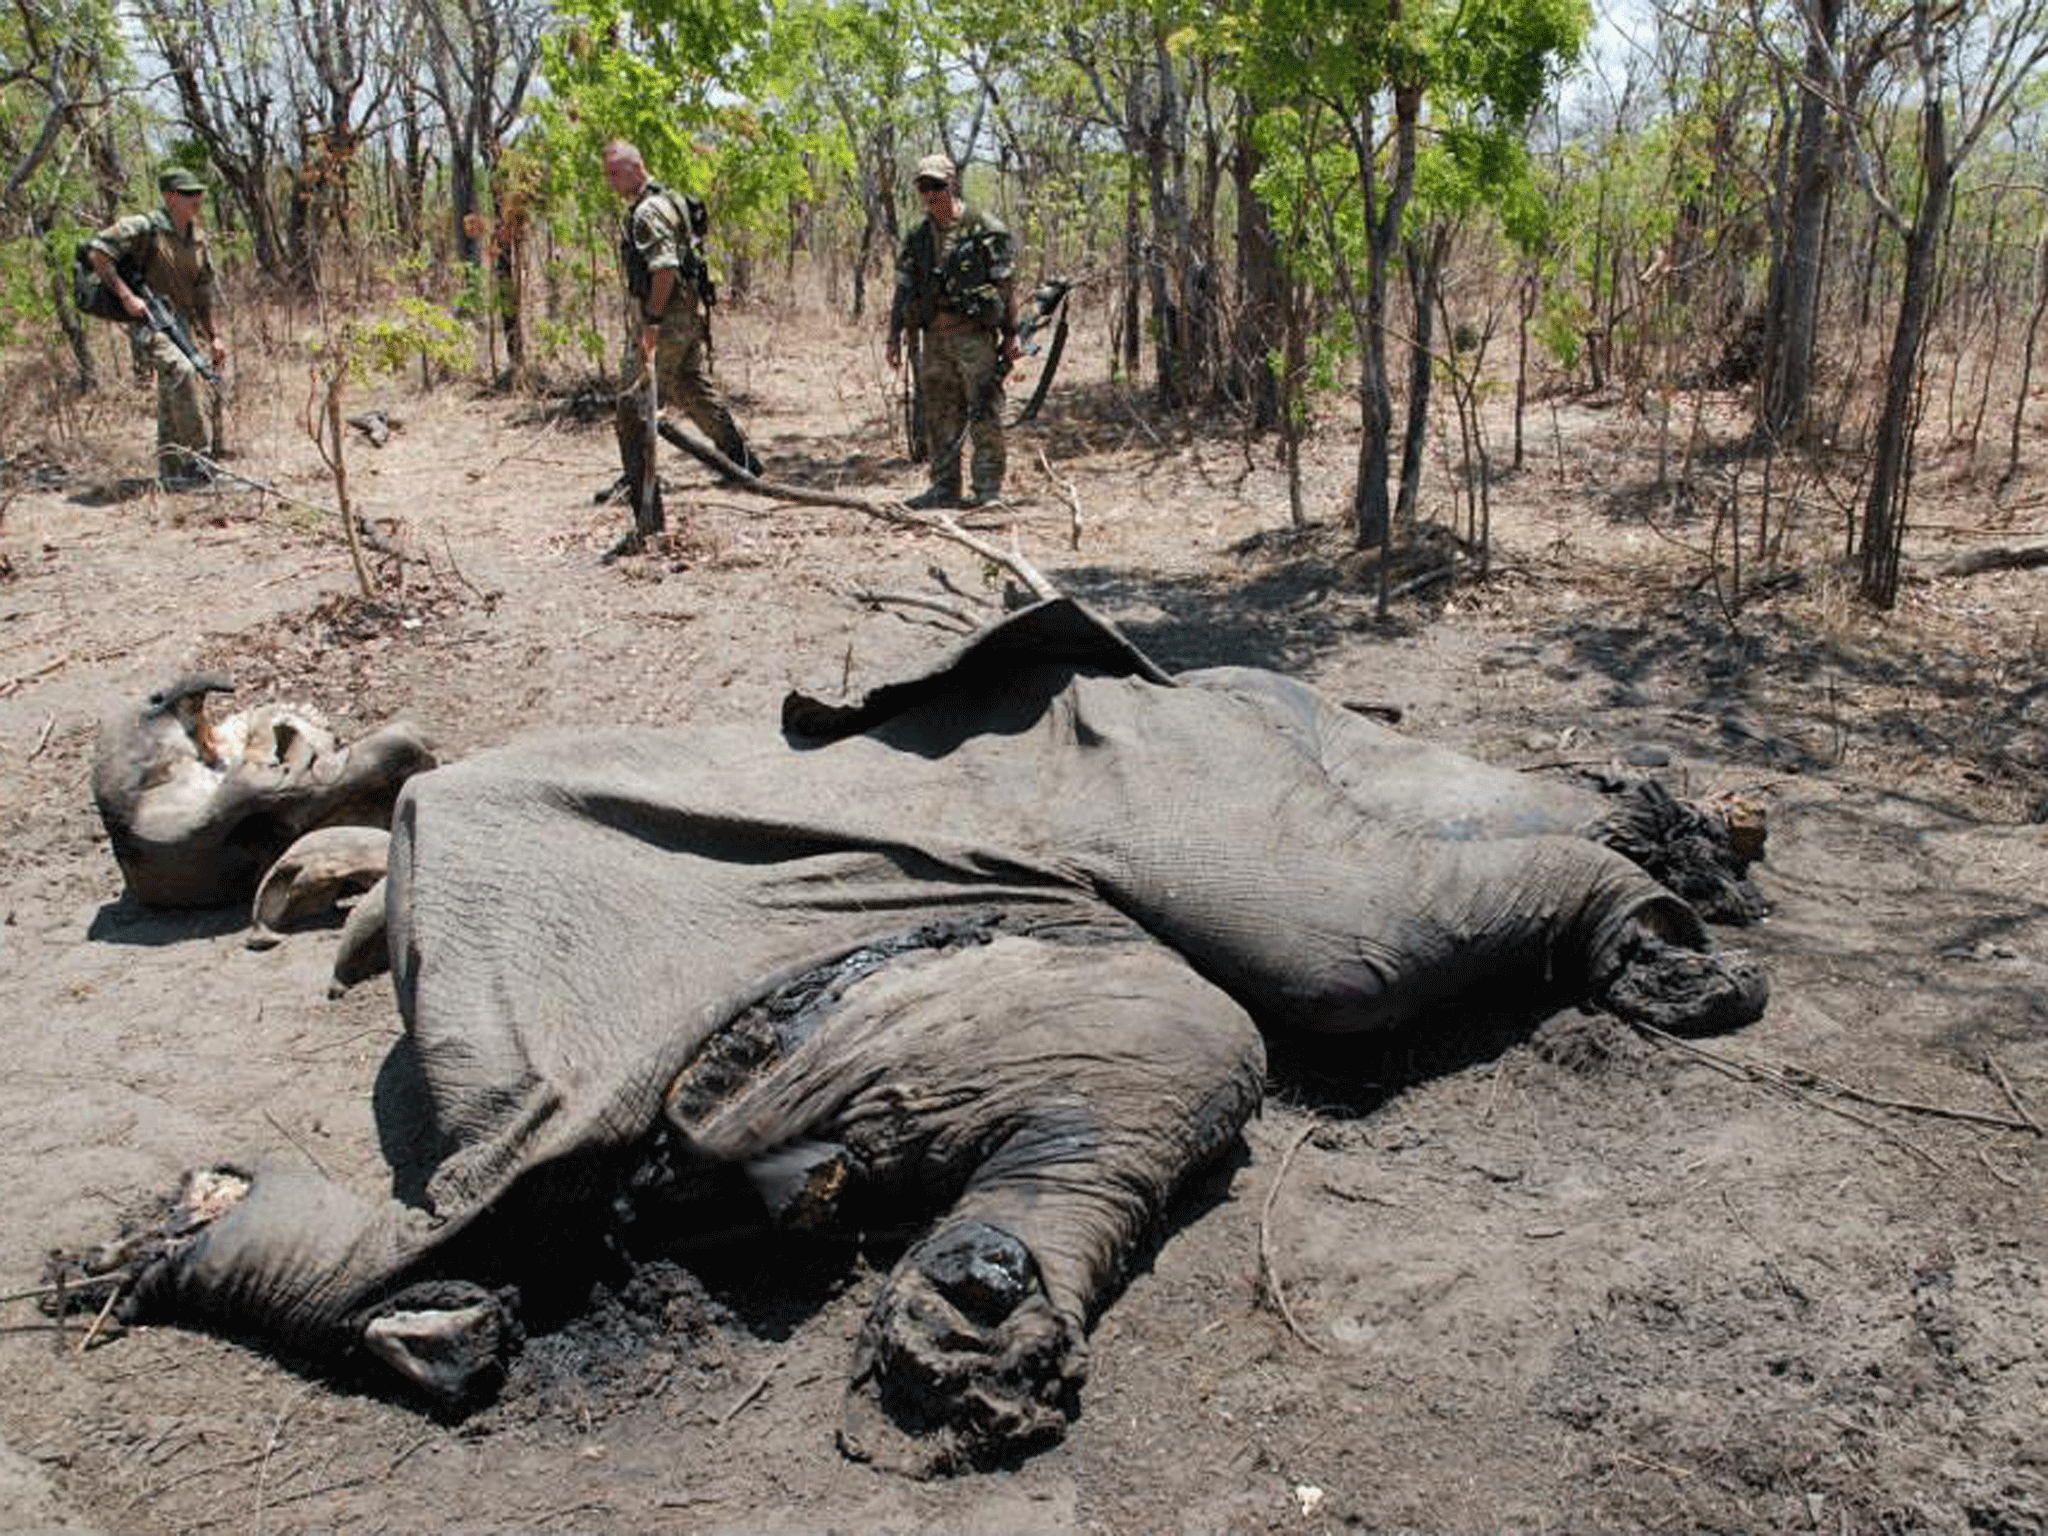 Twenty thousand elephants are slaughtered for their tusks each year